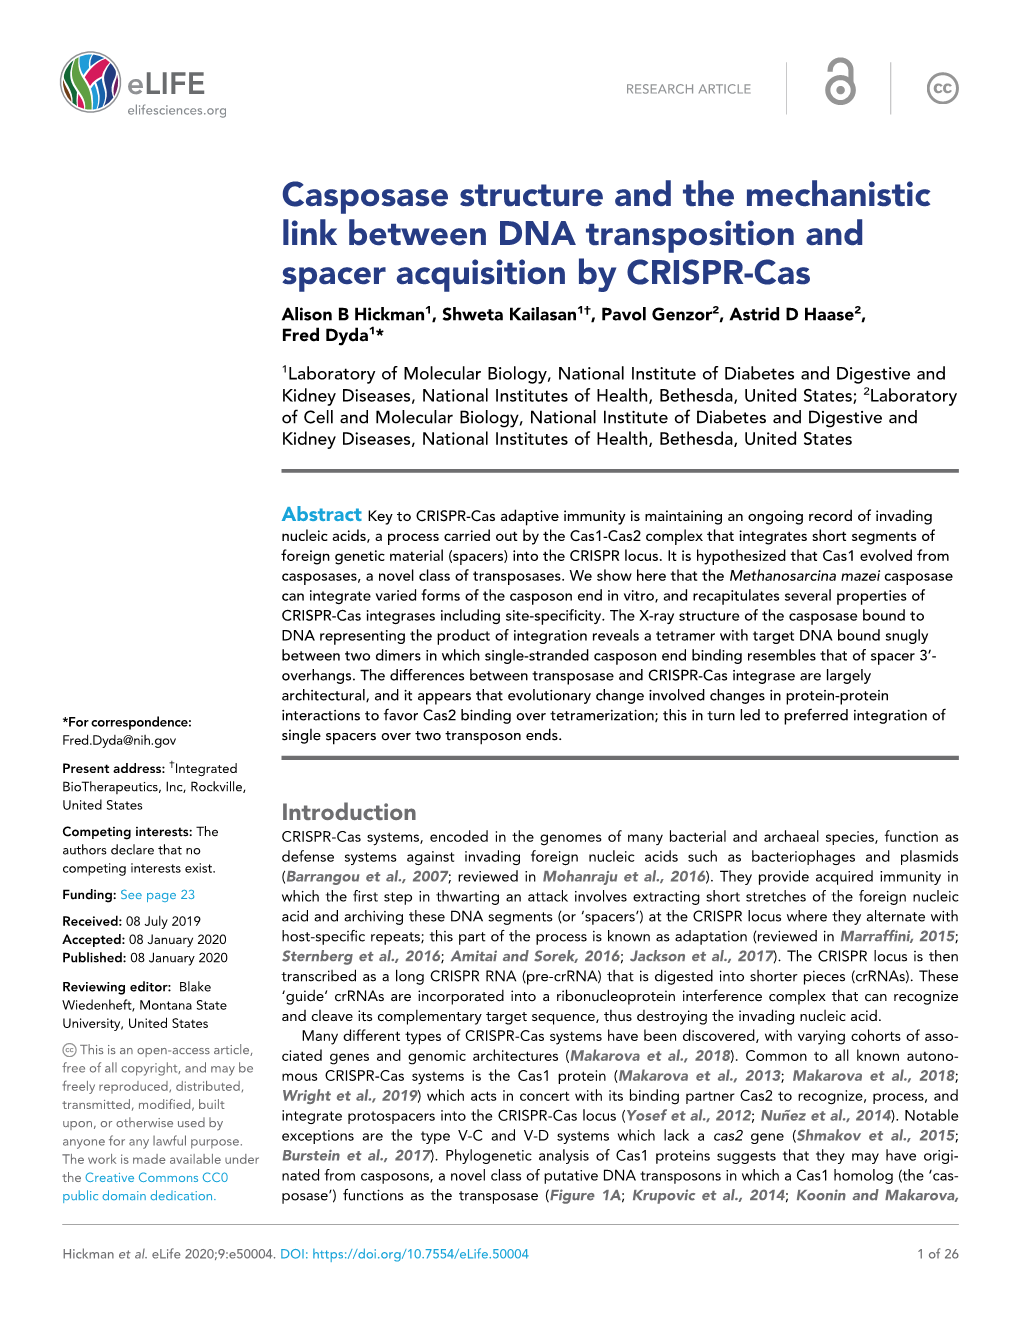 Casposase Structure and the Mechanistic Link Between DNA